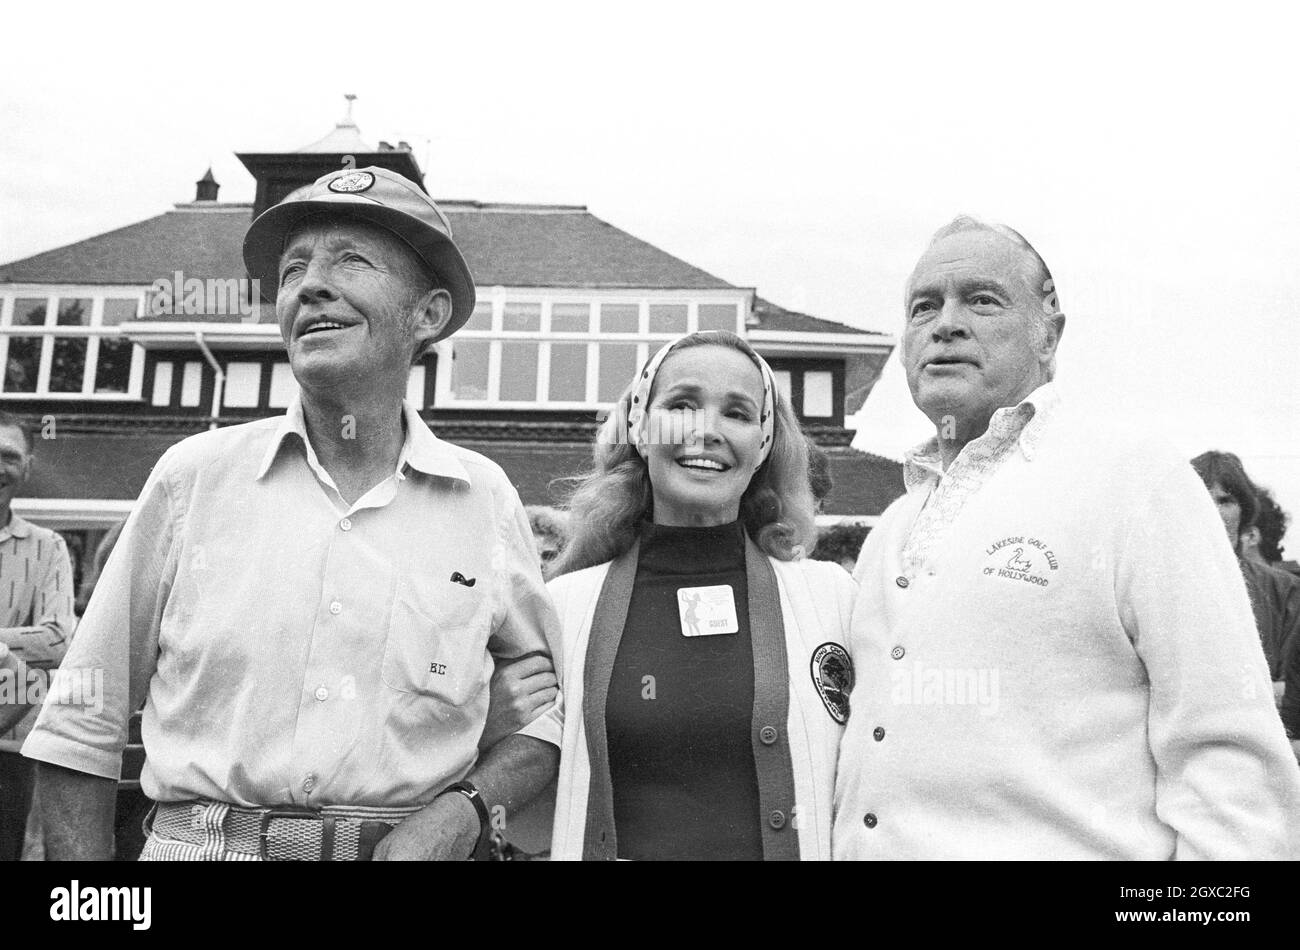 Singer and actor Bing Crosby, his wife Kathryn Crosby formerly Grant and comedian and actor Bob Hope at the Pro-Am golf tournament at Sunningdale, Berkshire on August 06 1975.  Stock Photo